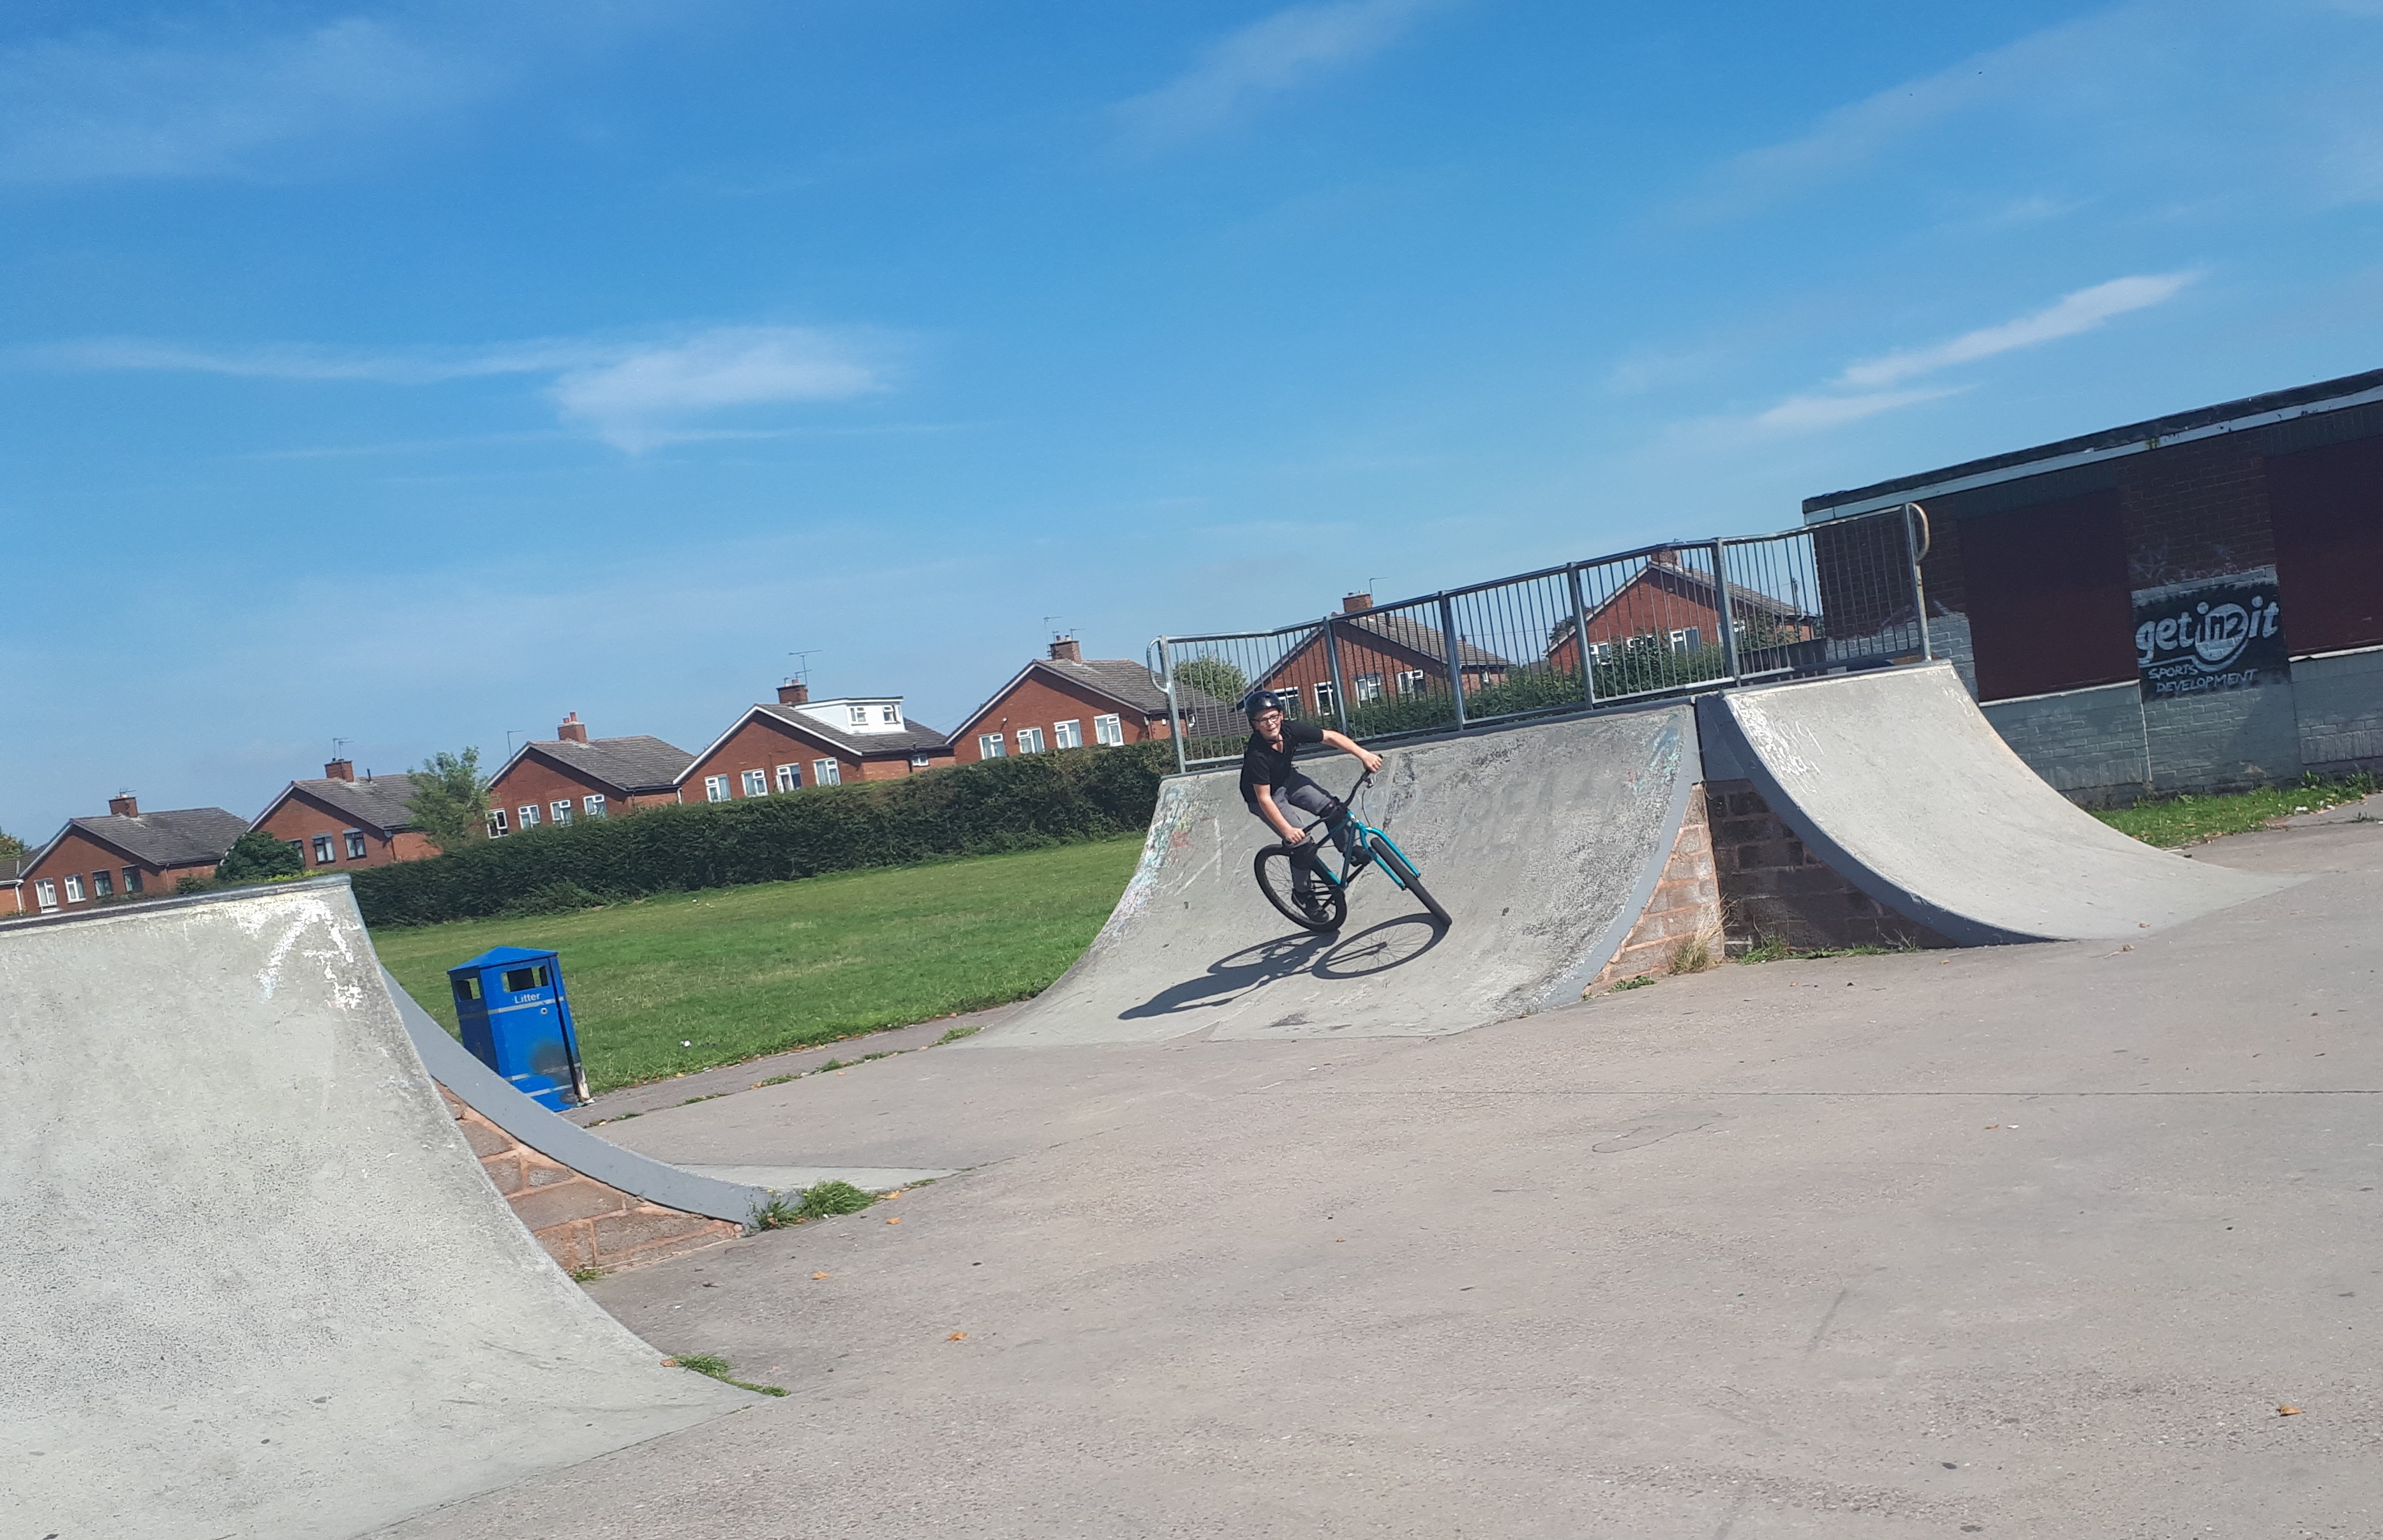 A picture of the former skatepark.